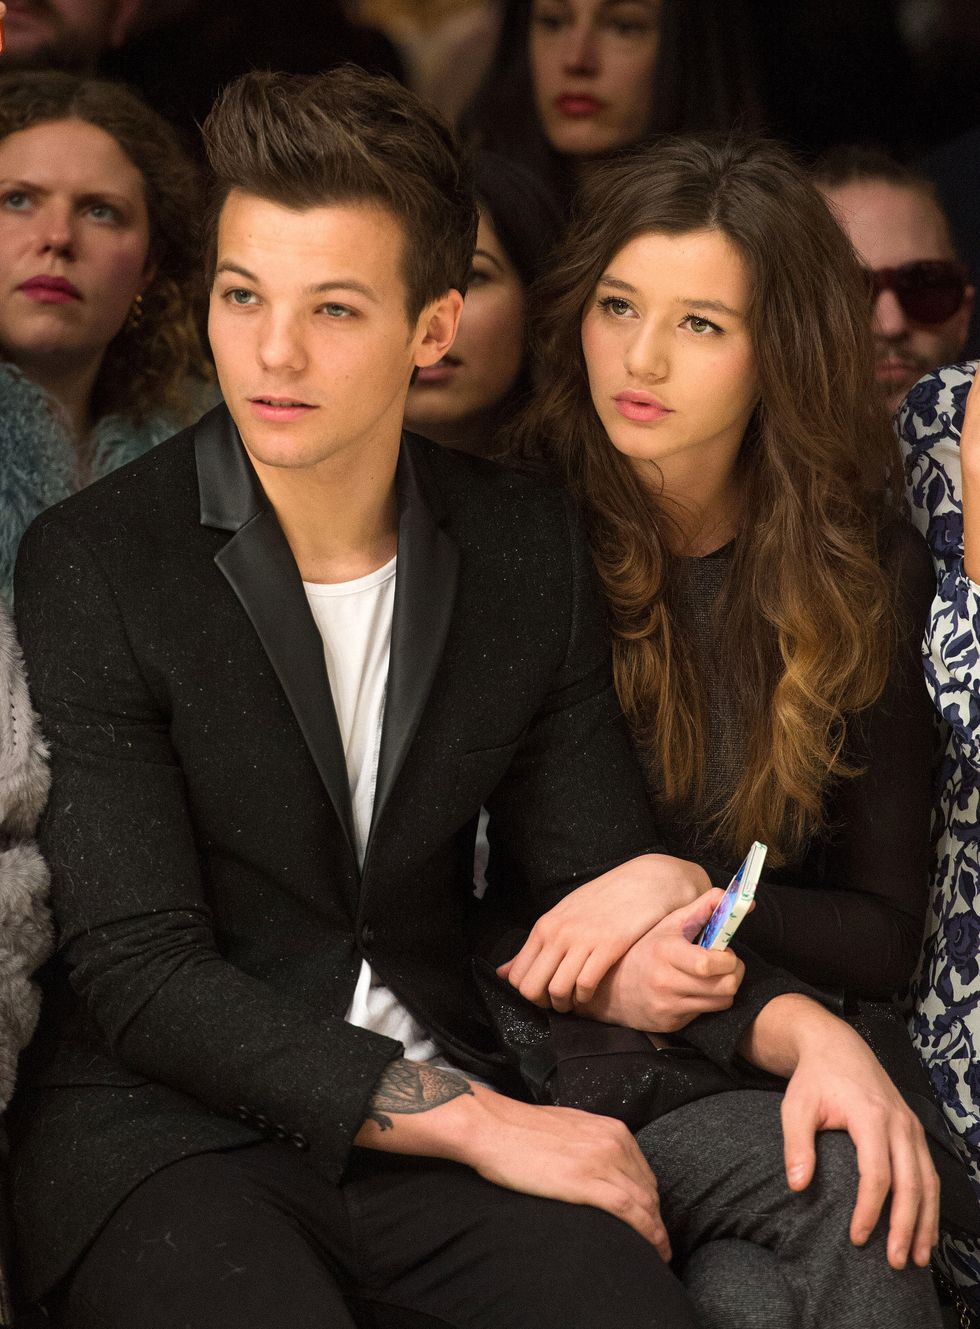 Louis Tomlinson rekindles romance with Eleanor Calder two years after split, apparently